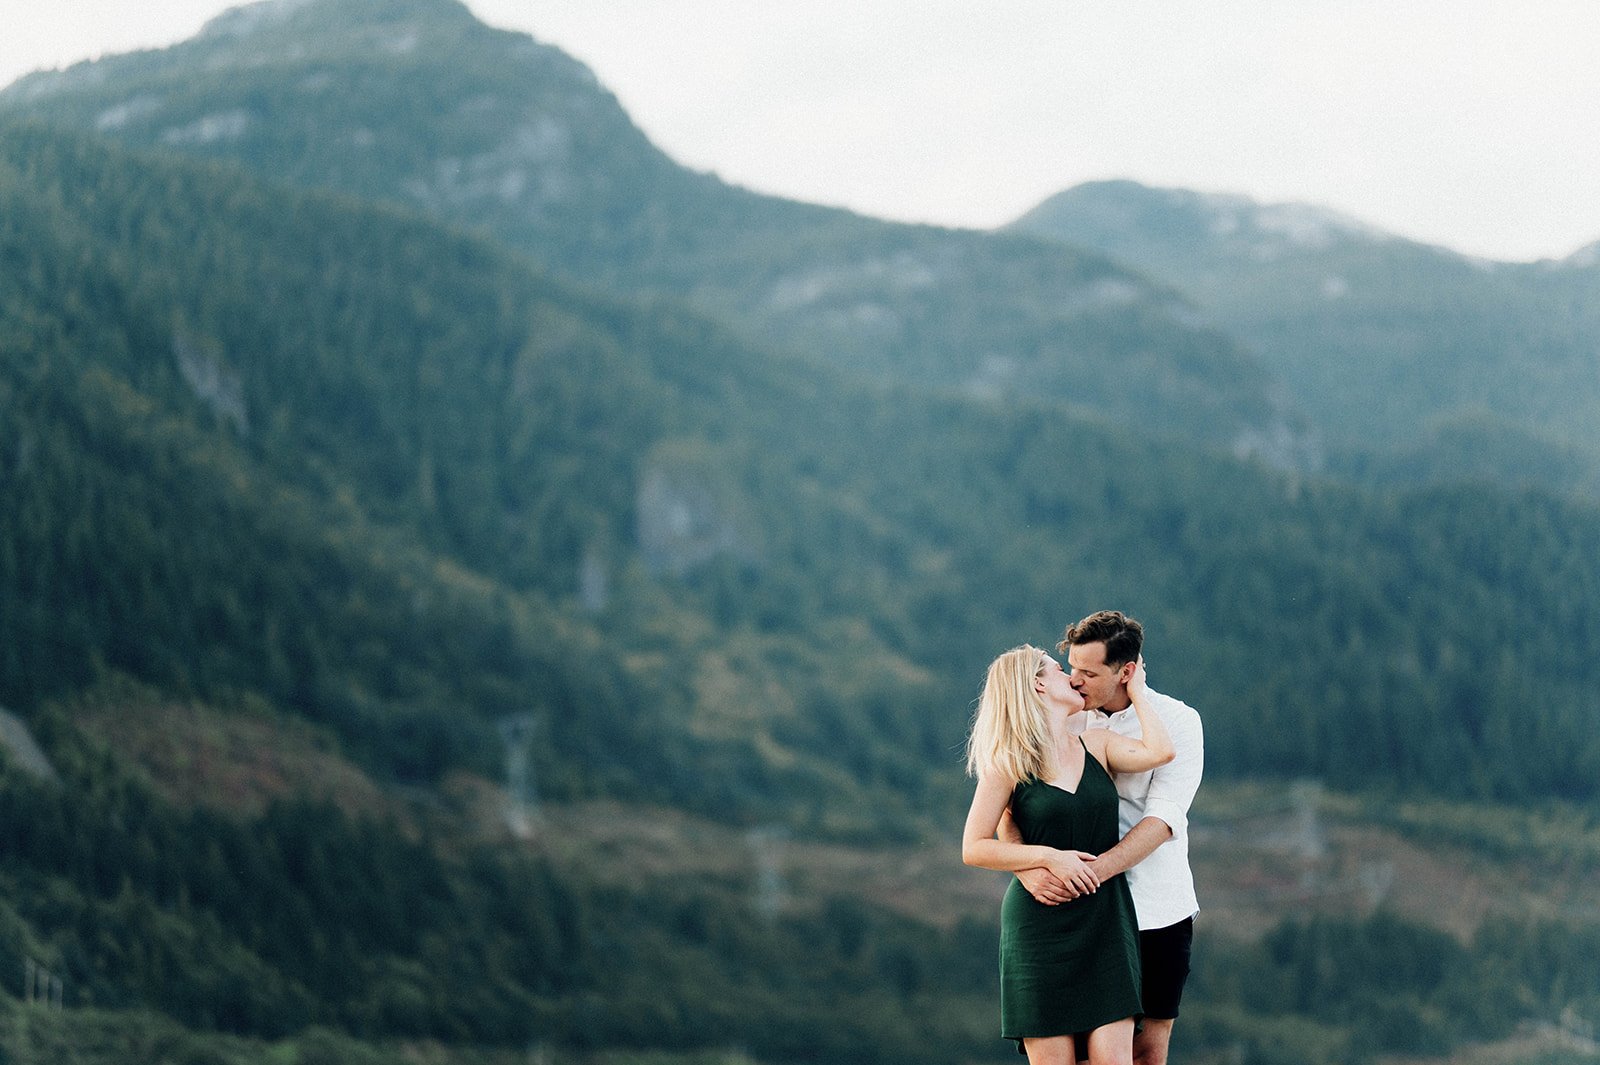 A man lovingly embraces his fiancee from behind as she kisses him in front of and emerald green mountain.